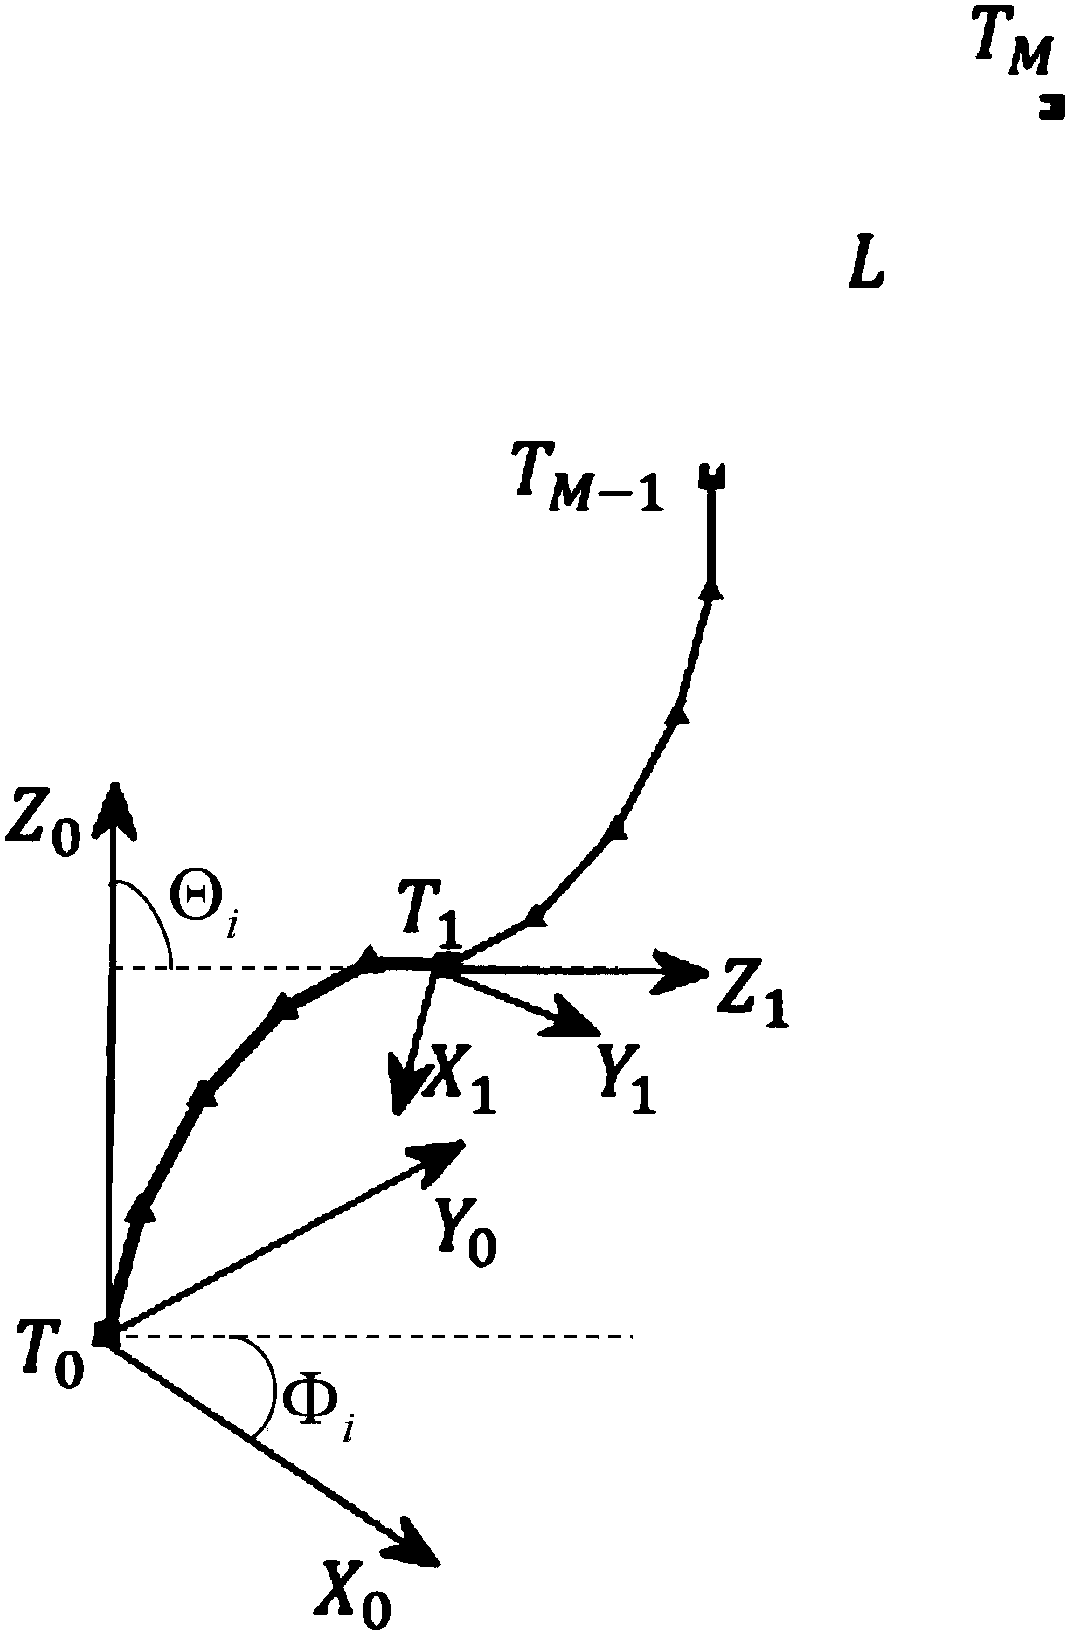 Continuous mechanical-arm space obstacle avoidance trajectory planning method